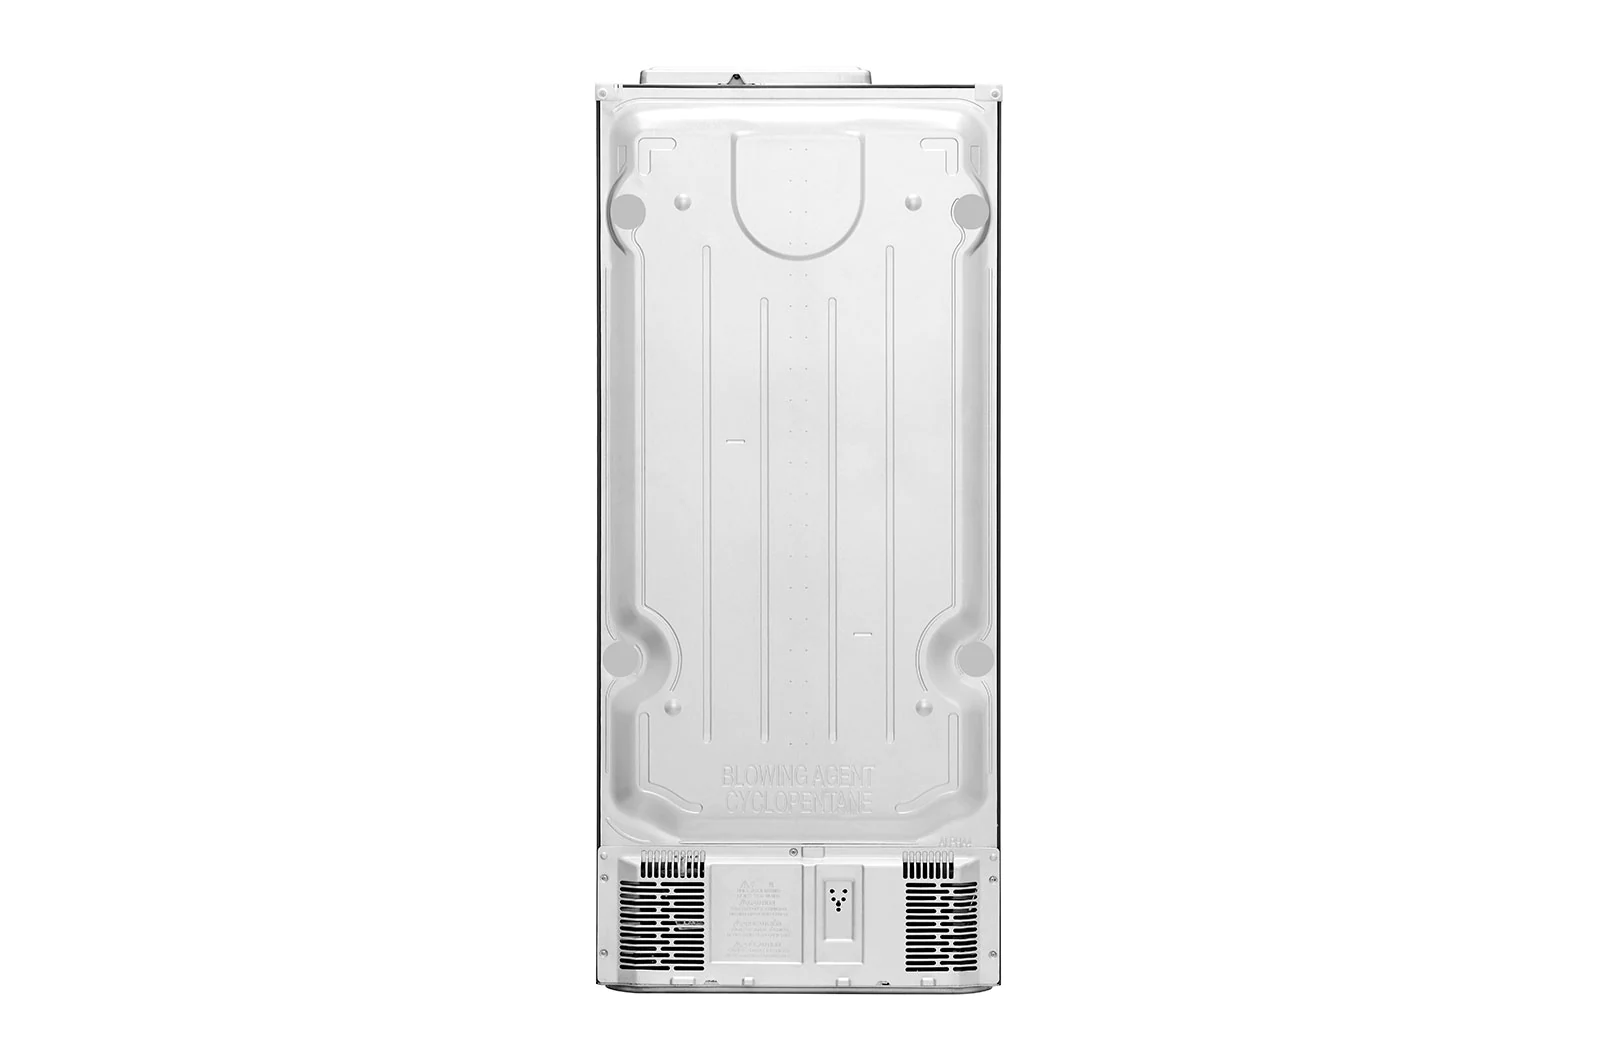 LG 516L Refrigerator With DoorCooling+™ Technology - Silver